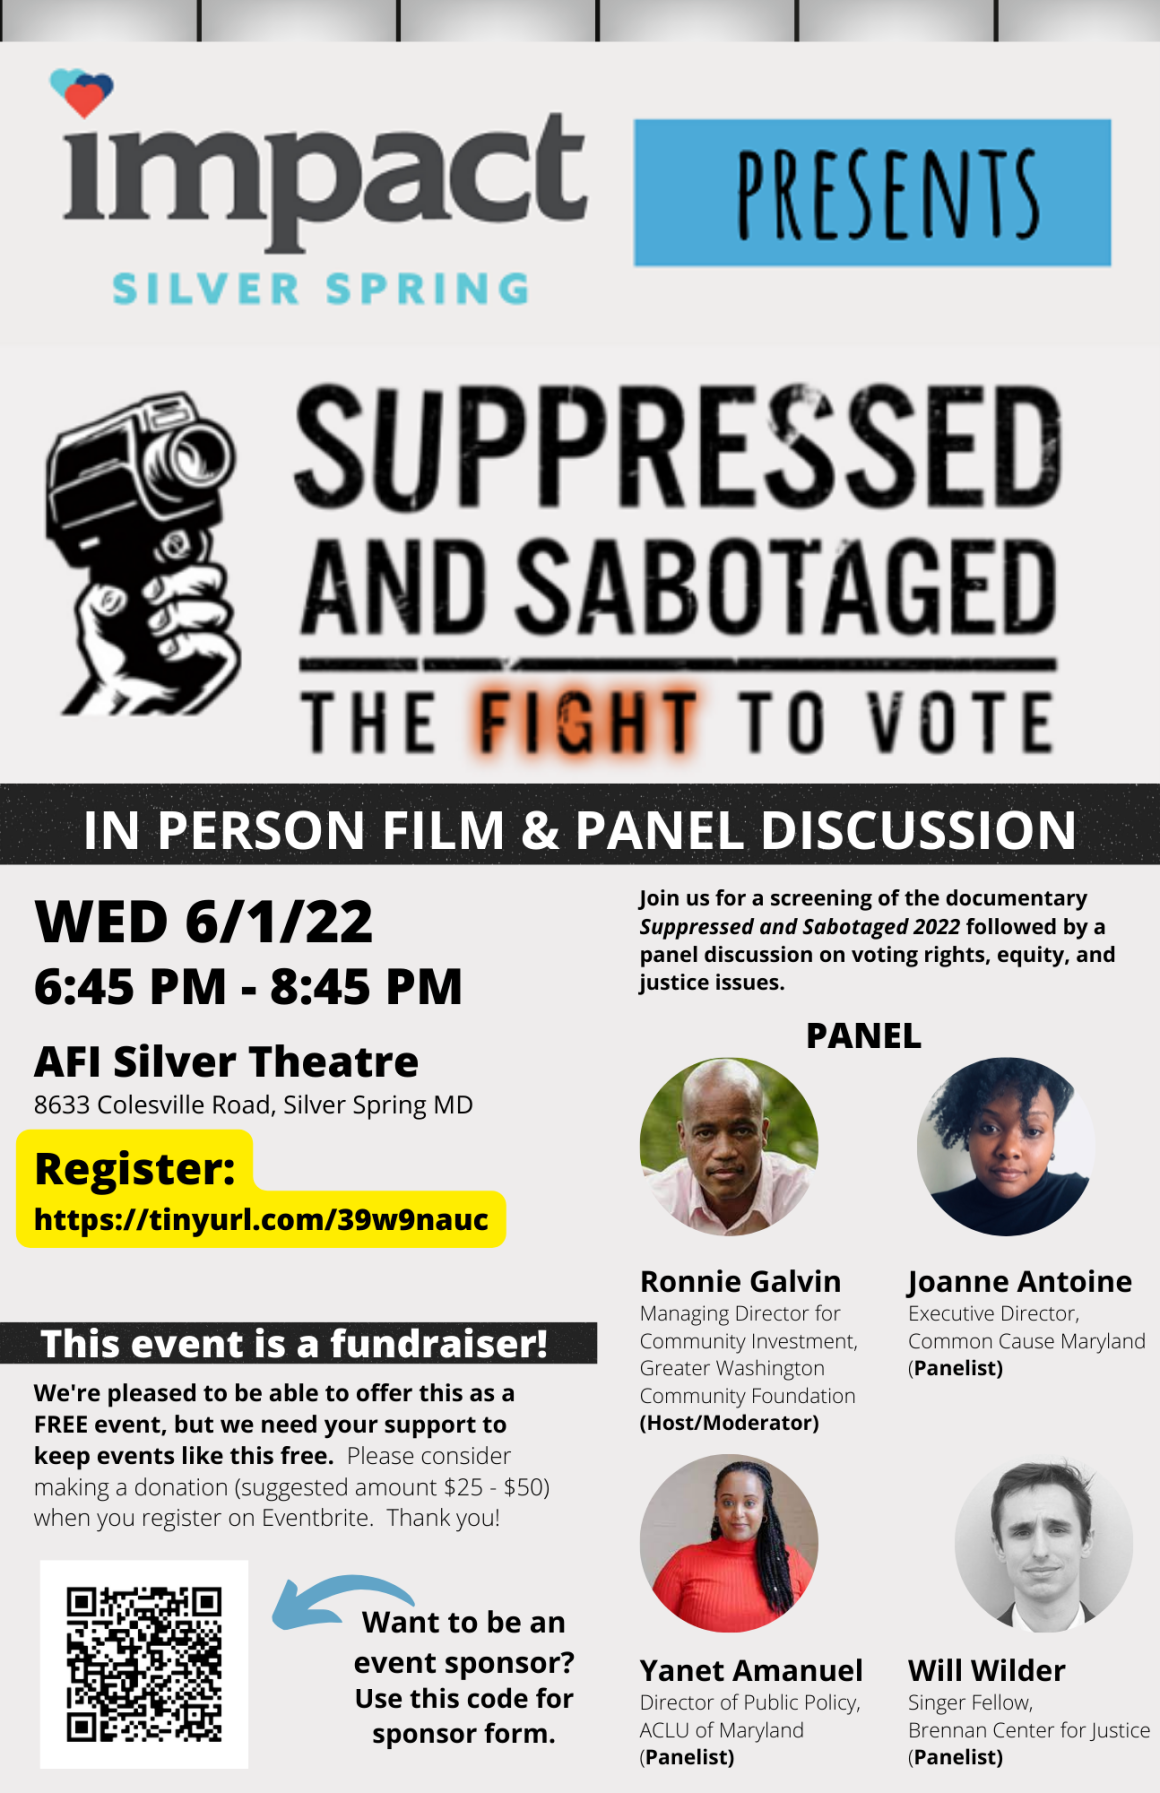 IMPACT presents Suppressed and Sabotaged documentary screening and panel discussion. The event is Wednesday, June 1, 2022, from 6:45 p.m. to 8:45 p.m. at AFI Silver Theater in Silver Spring, Maryalnd. Flyer has headshots of panelists and their titles.